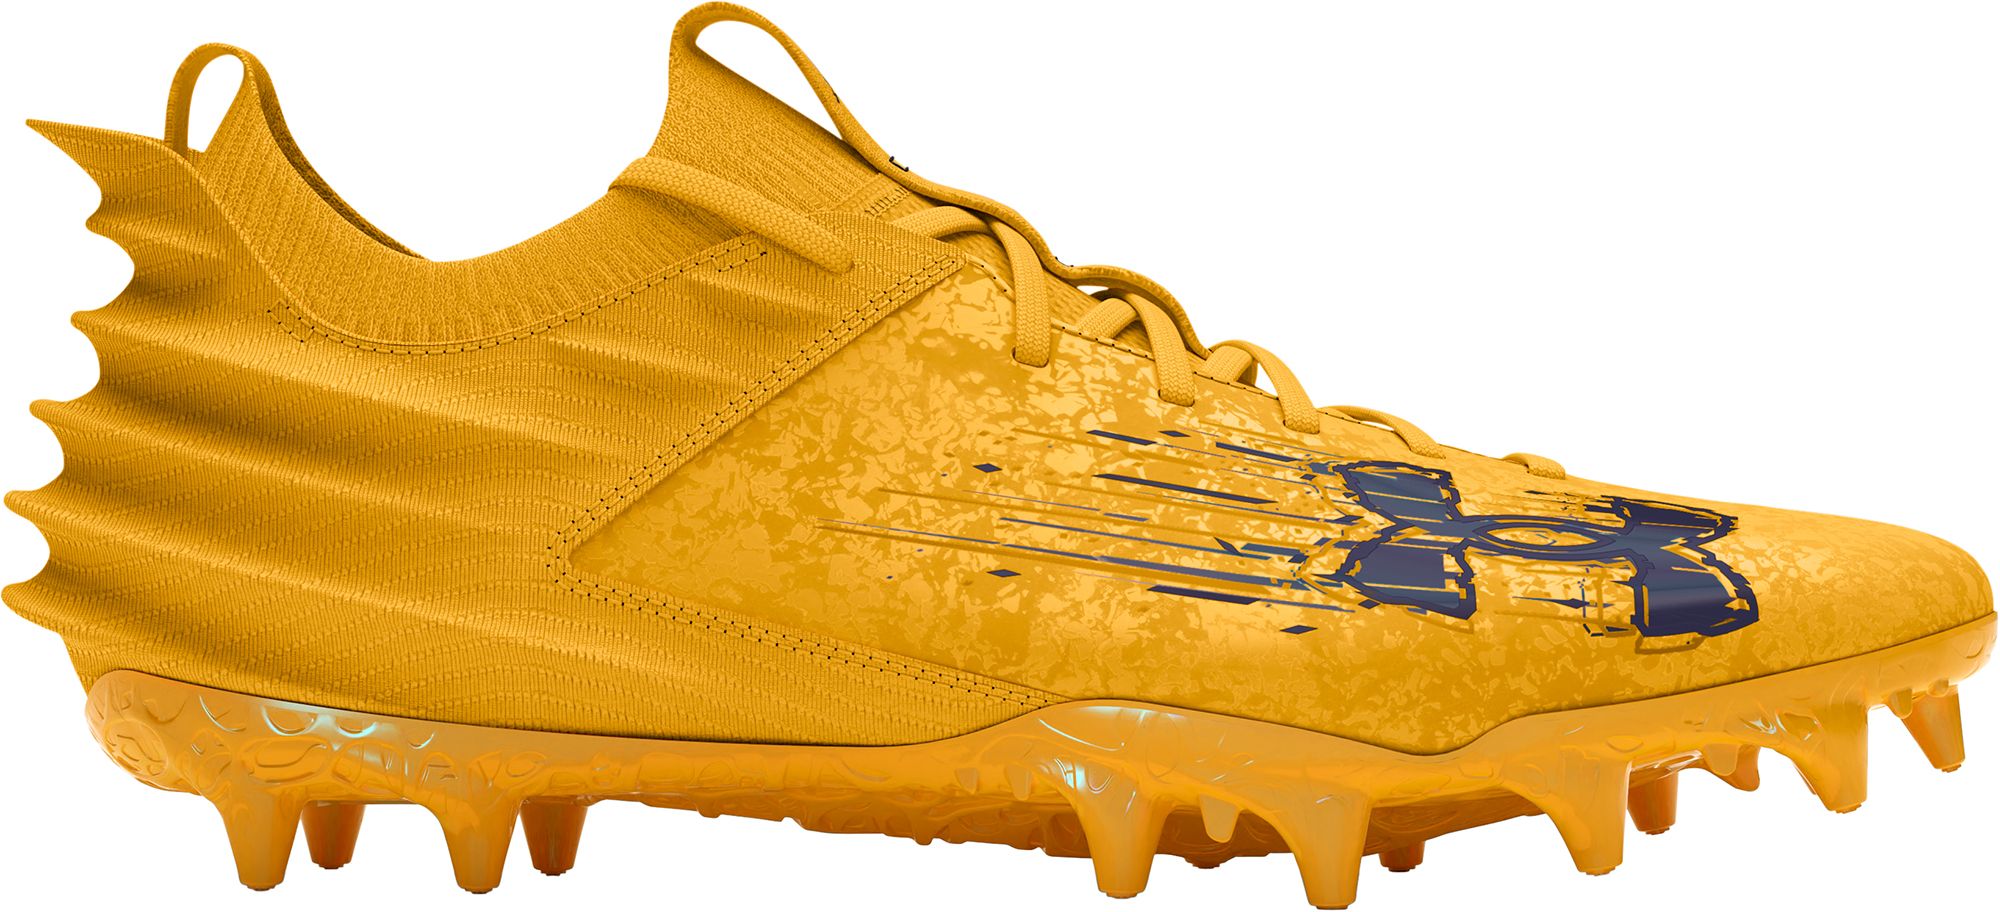 Under Armour Mens Blur Smoke Suede 2.0 MC Football Cleats